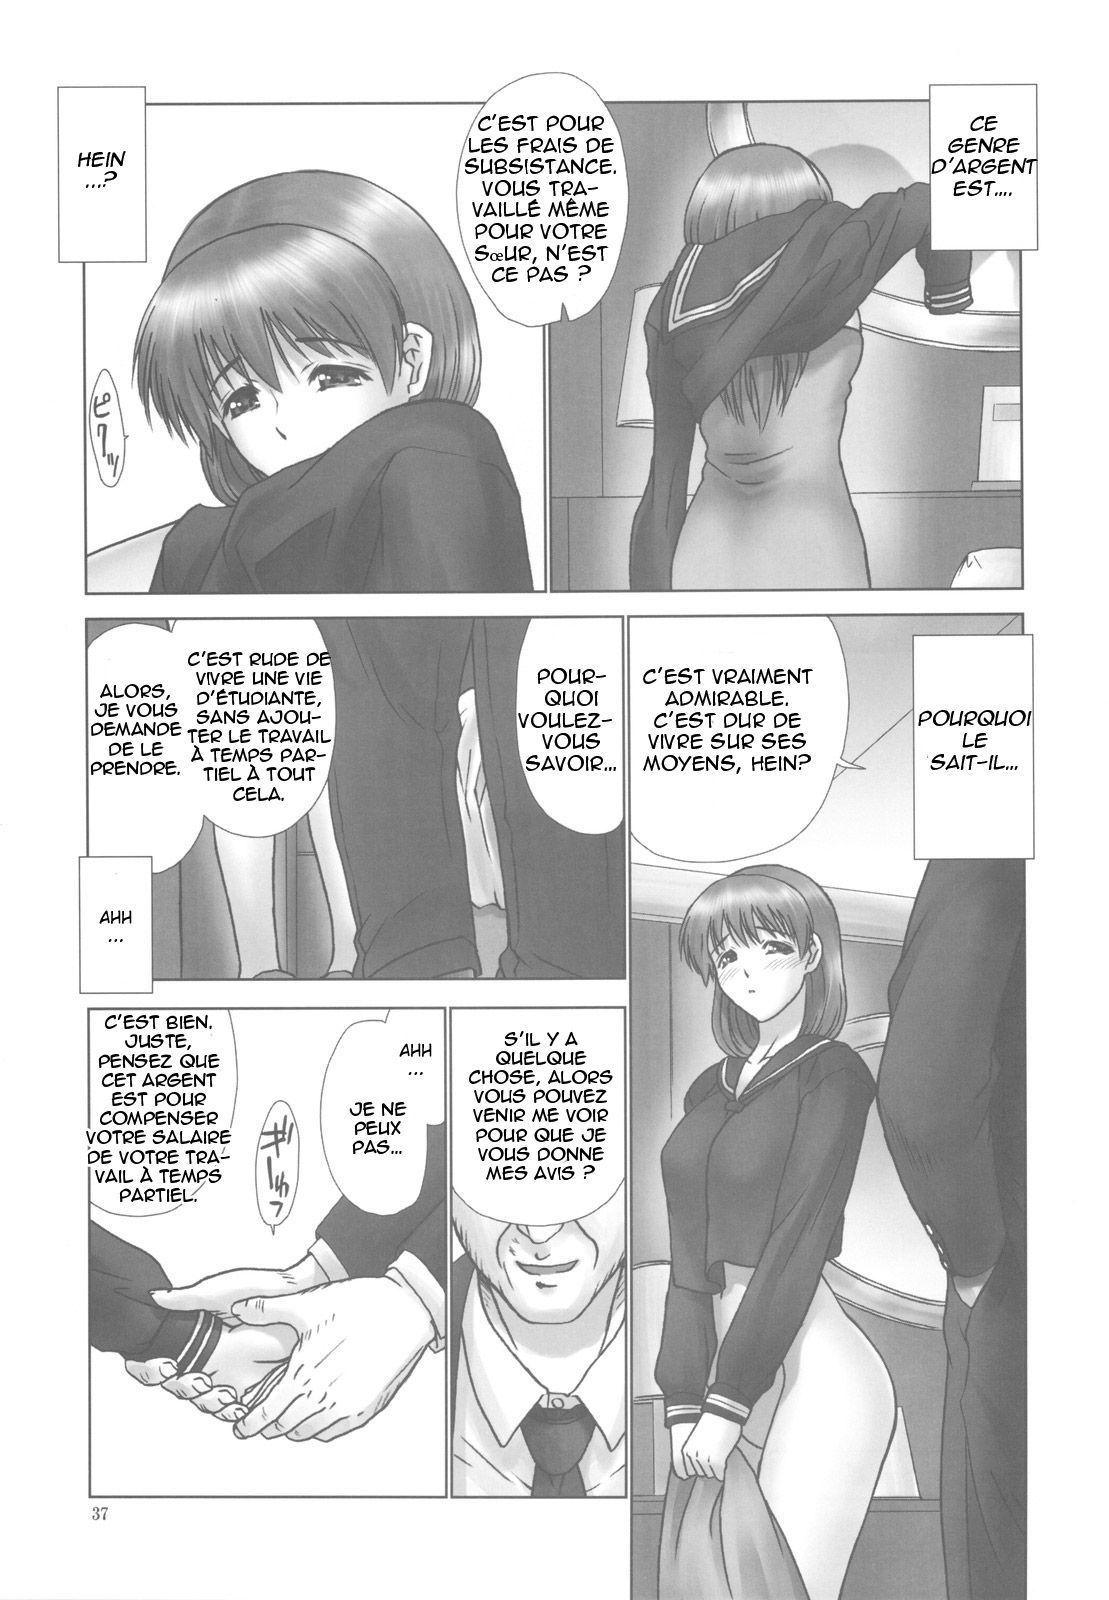 REI - slave to the grind - REI 07: CHAPTER 06 numero d'image 36